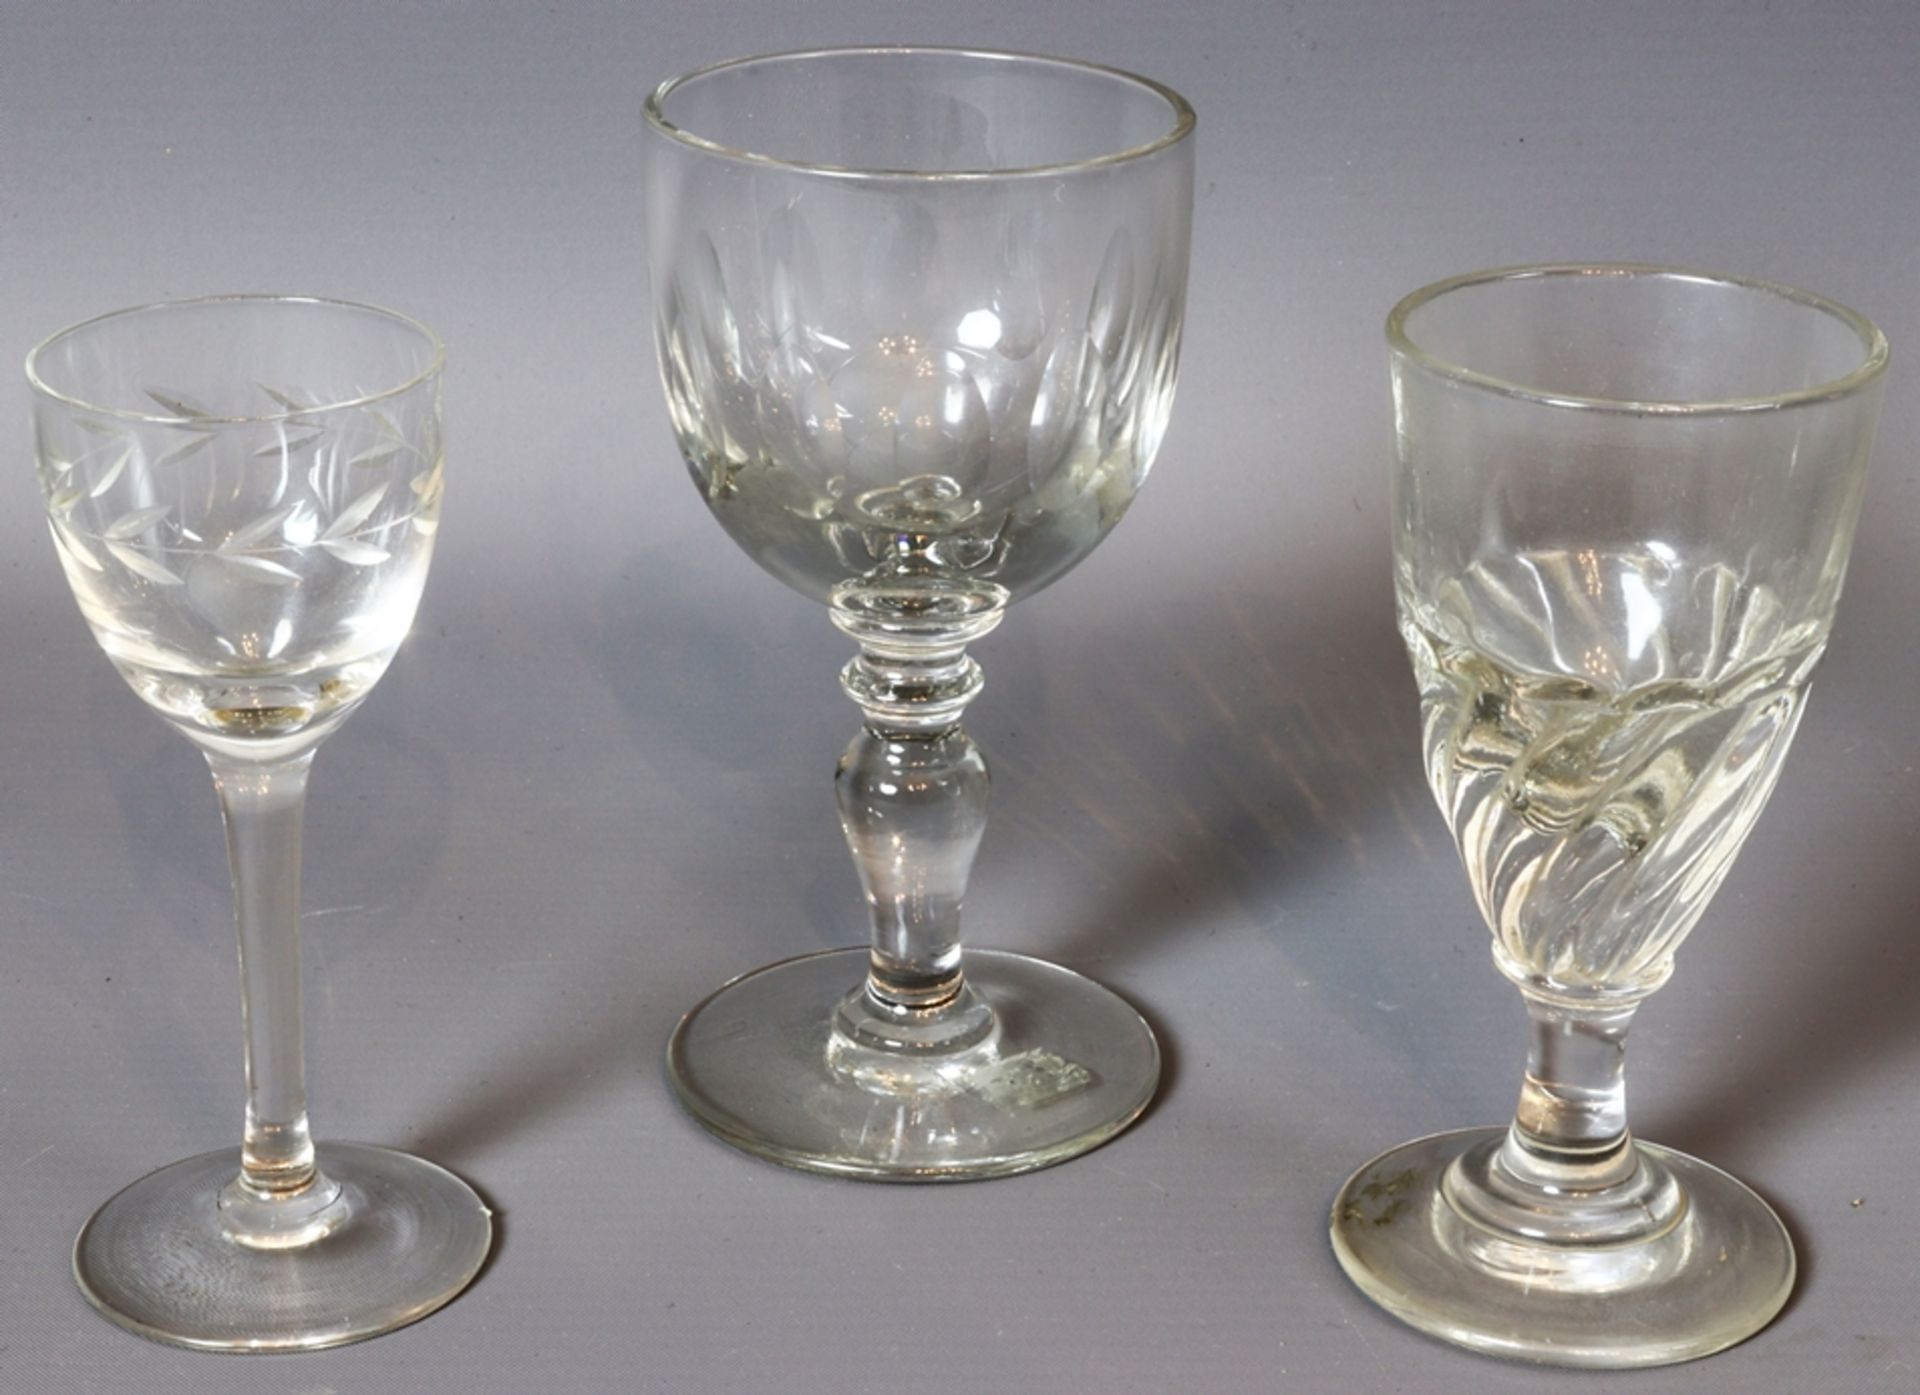 Collection - seven schnapps glasses/pub glasses late 19th/early 20th c., German - Image 4 of 5